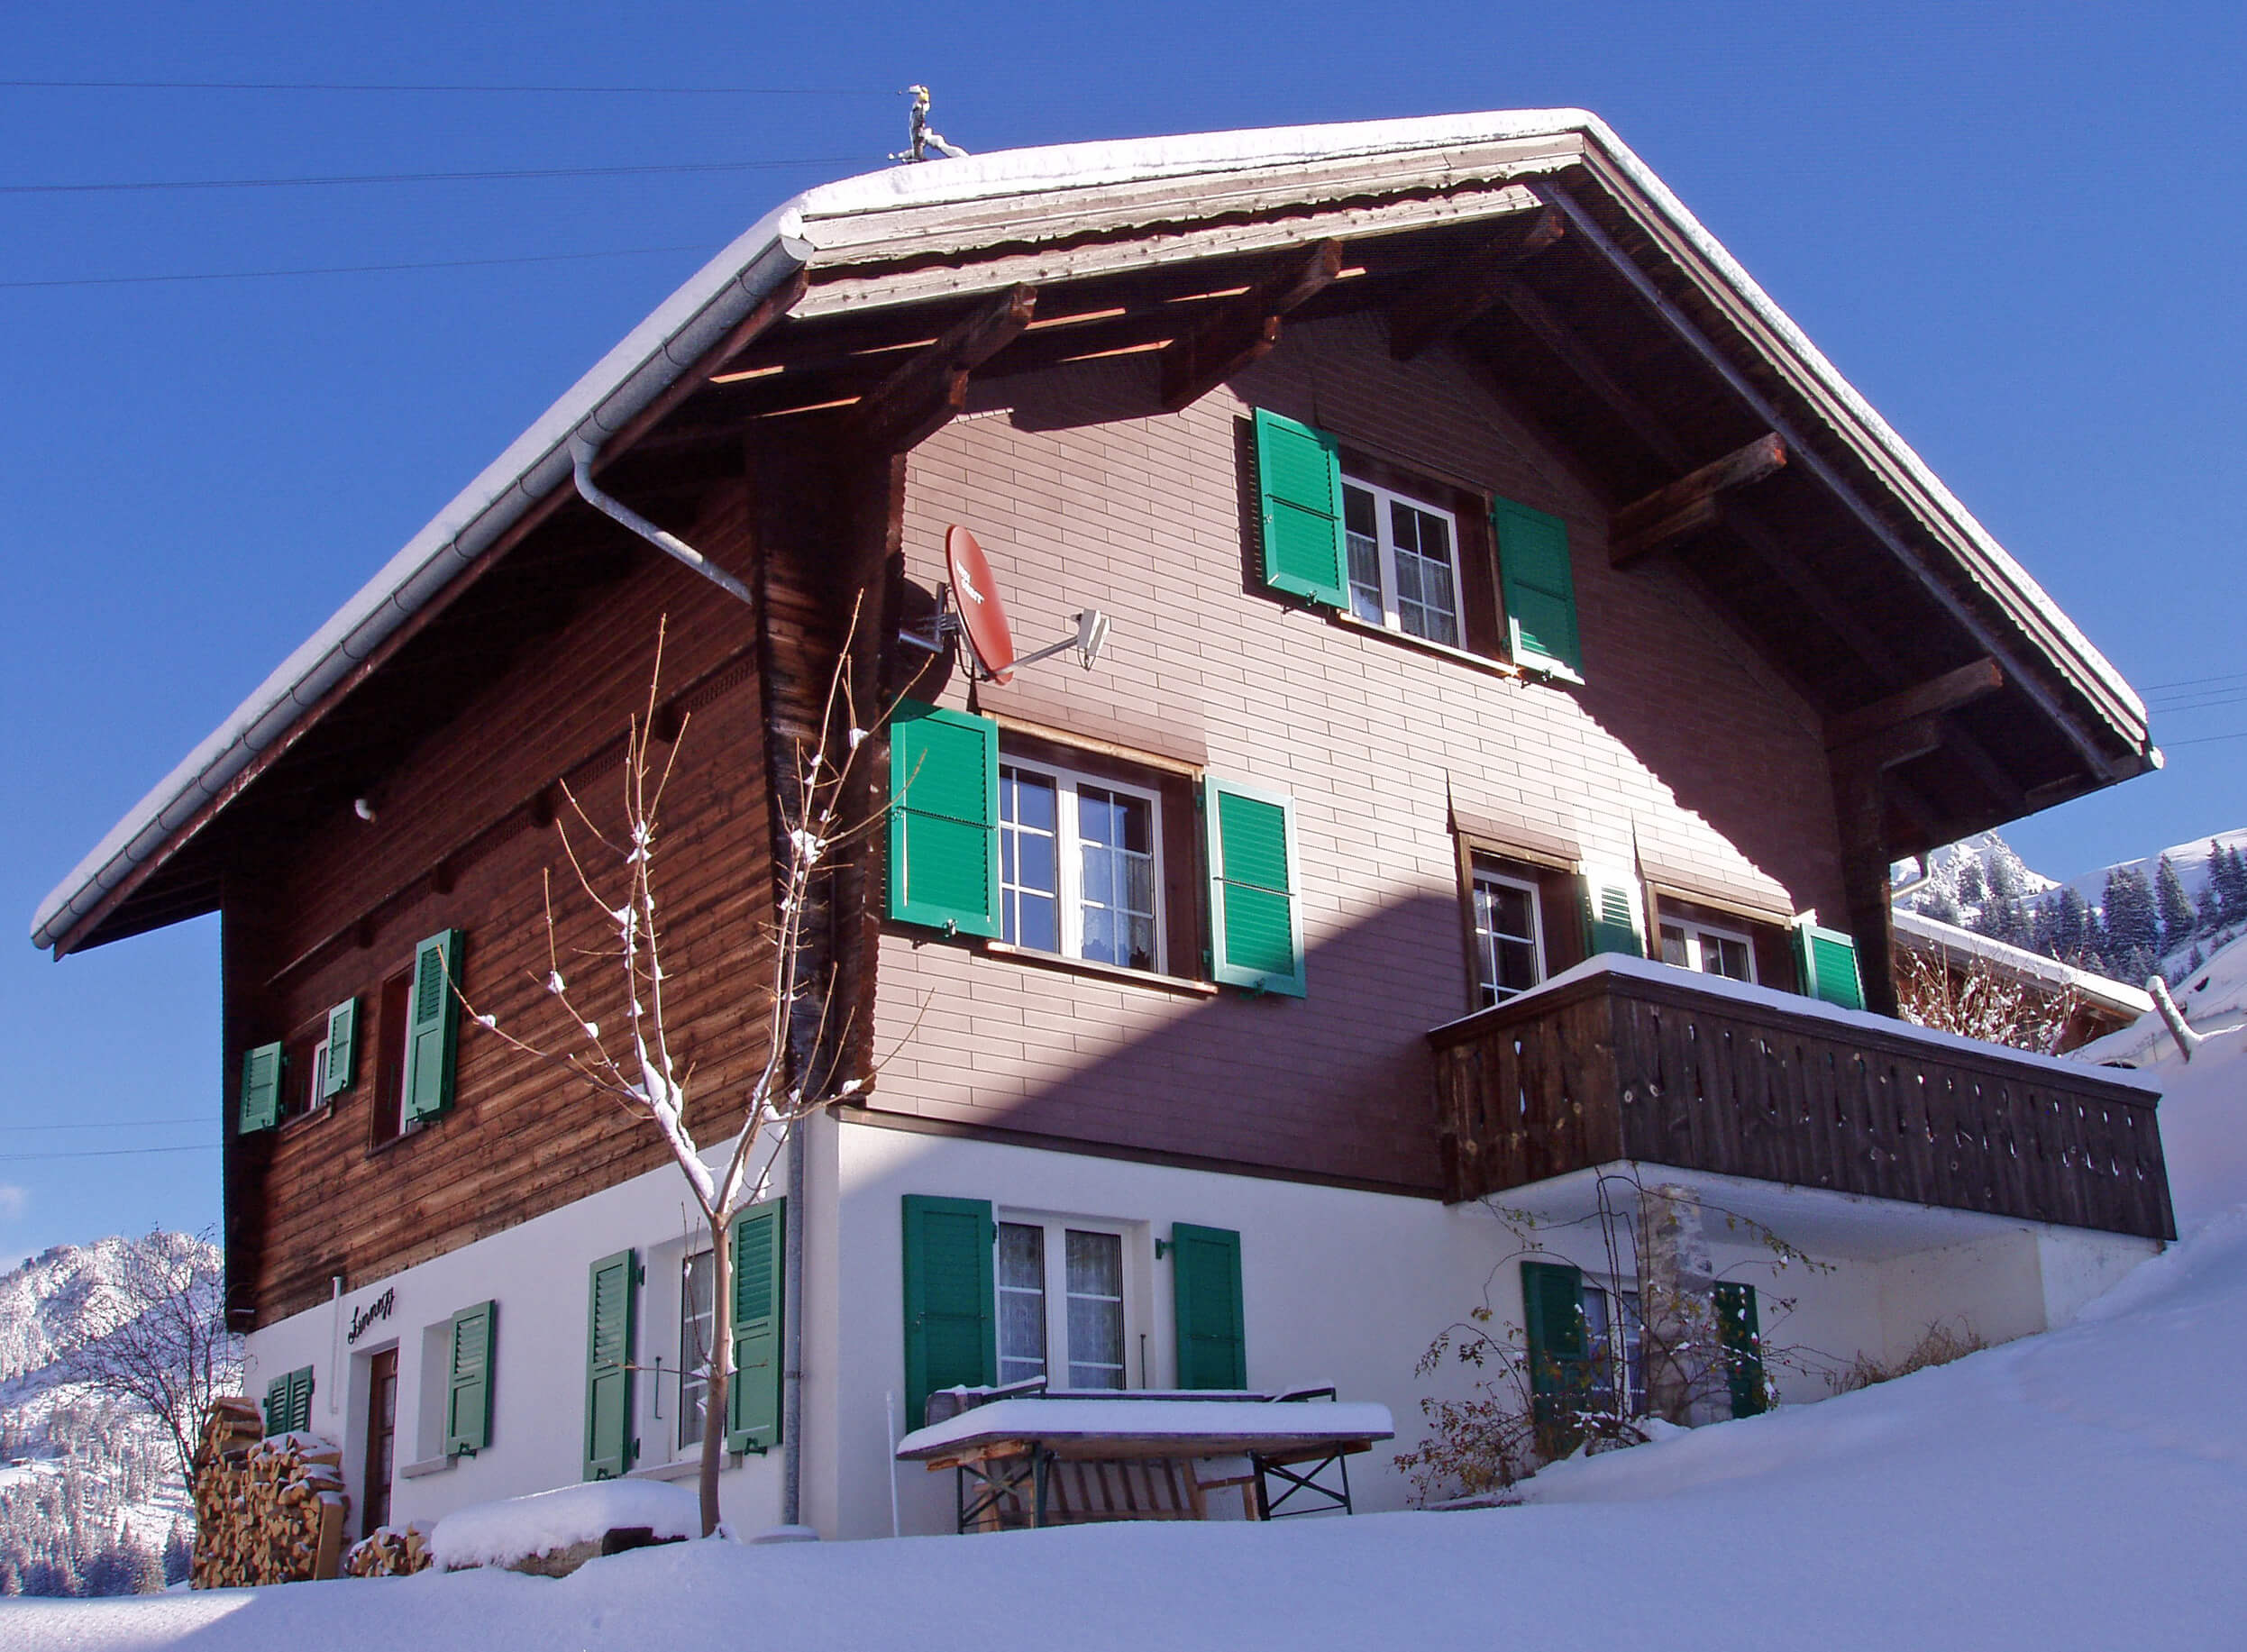 Exterior view in winter with balcony